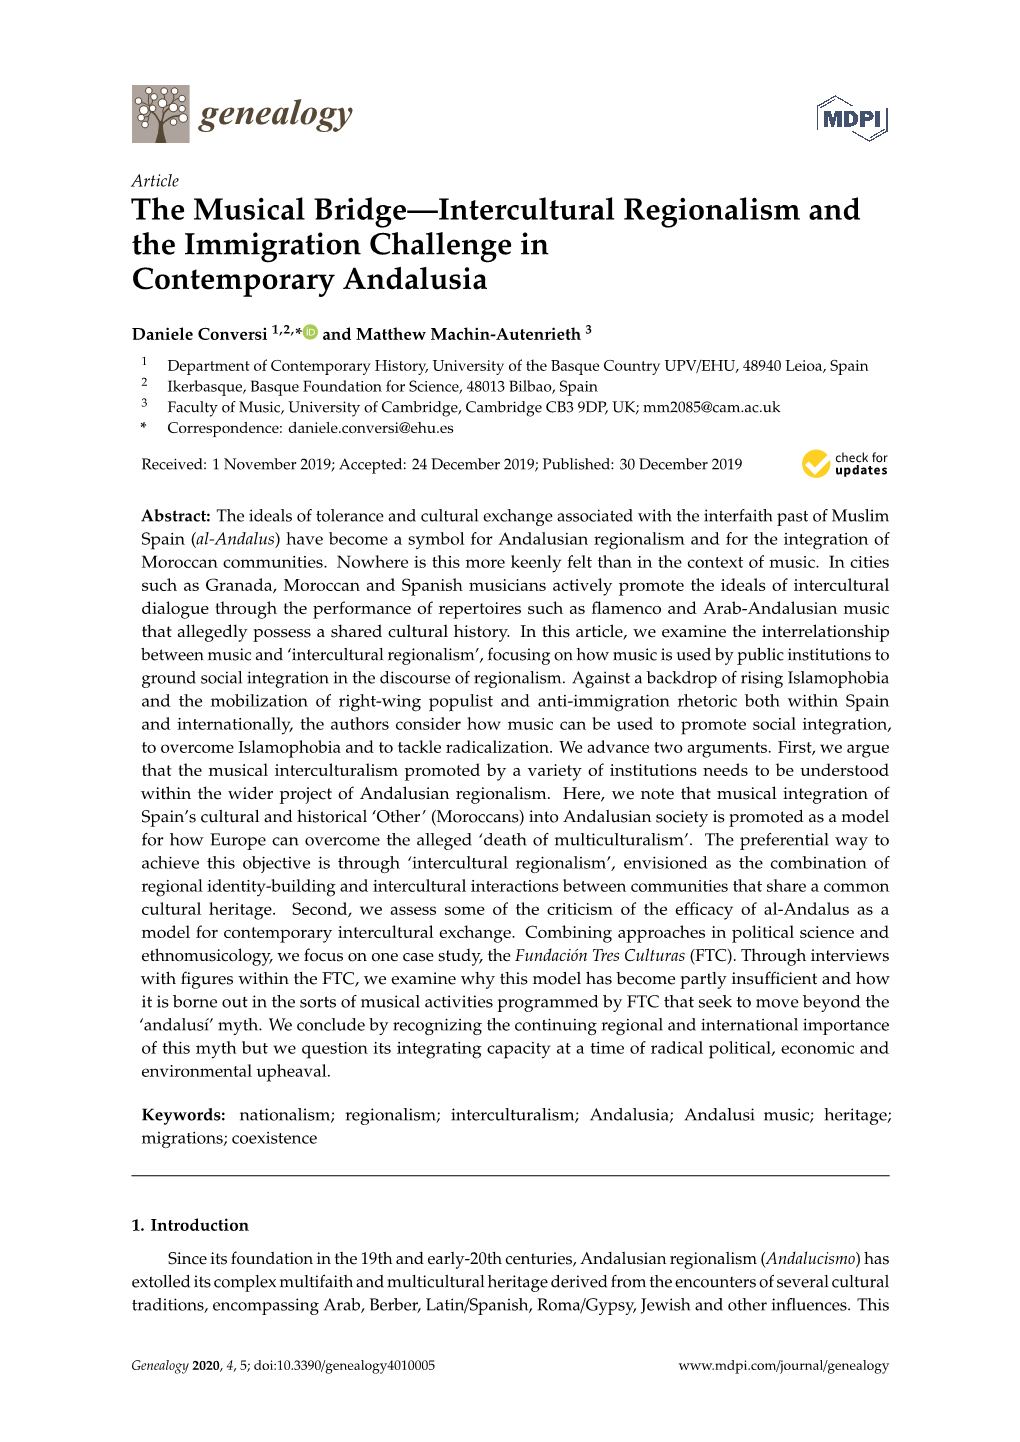 The Musical Bridge—Intercultural Regionalism and the Immigration Challenge in Contemporary Andalusia